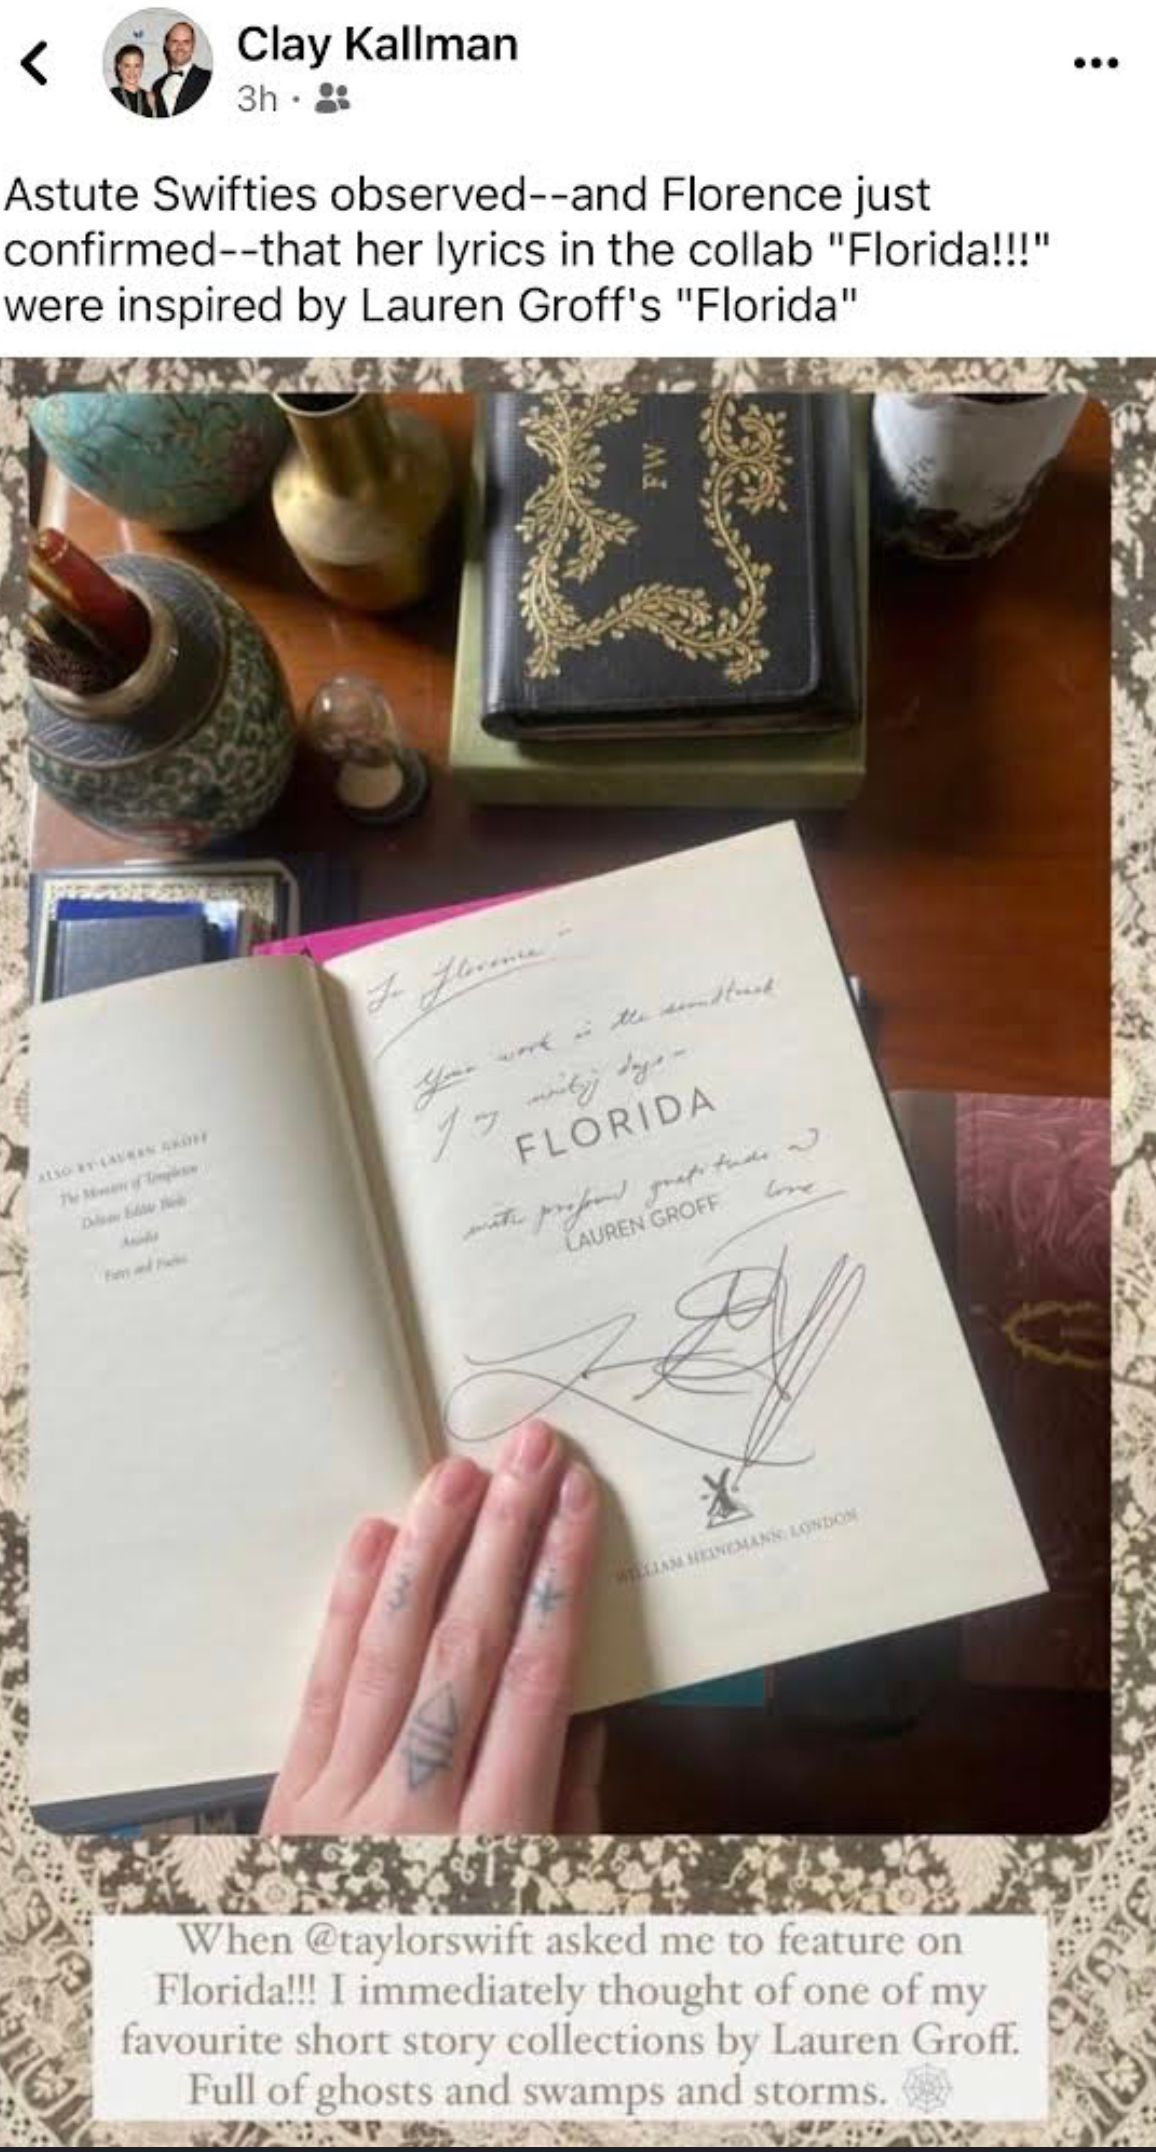 Instagram post by Florence from Florence and the Machine regarding being inspired by Lauren Groff's book, Florida, for the lyrics to Florida!!!.
